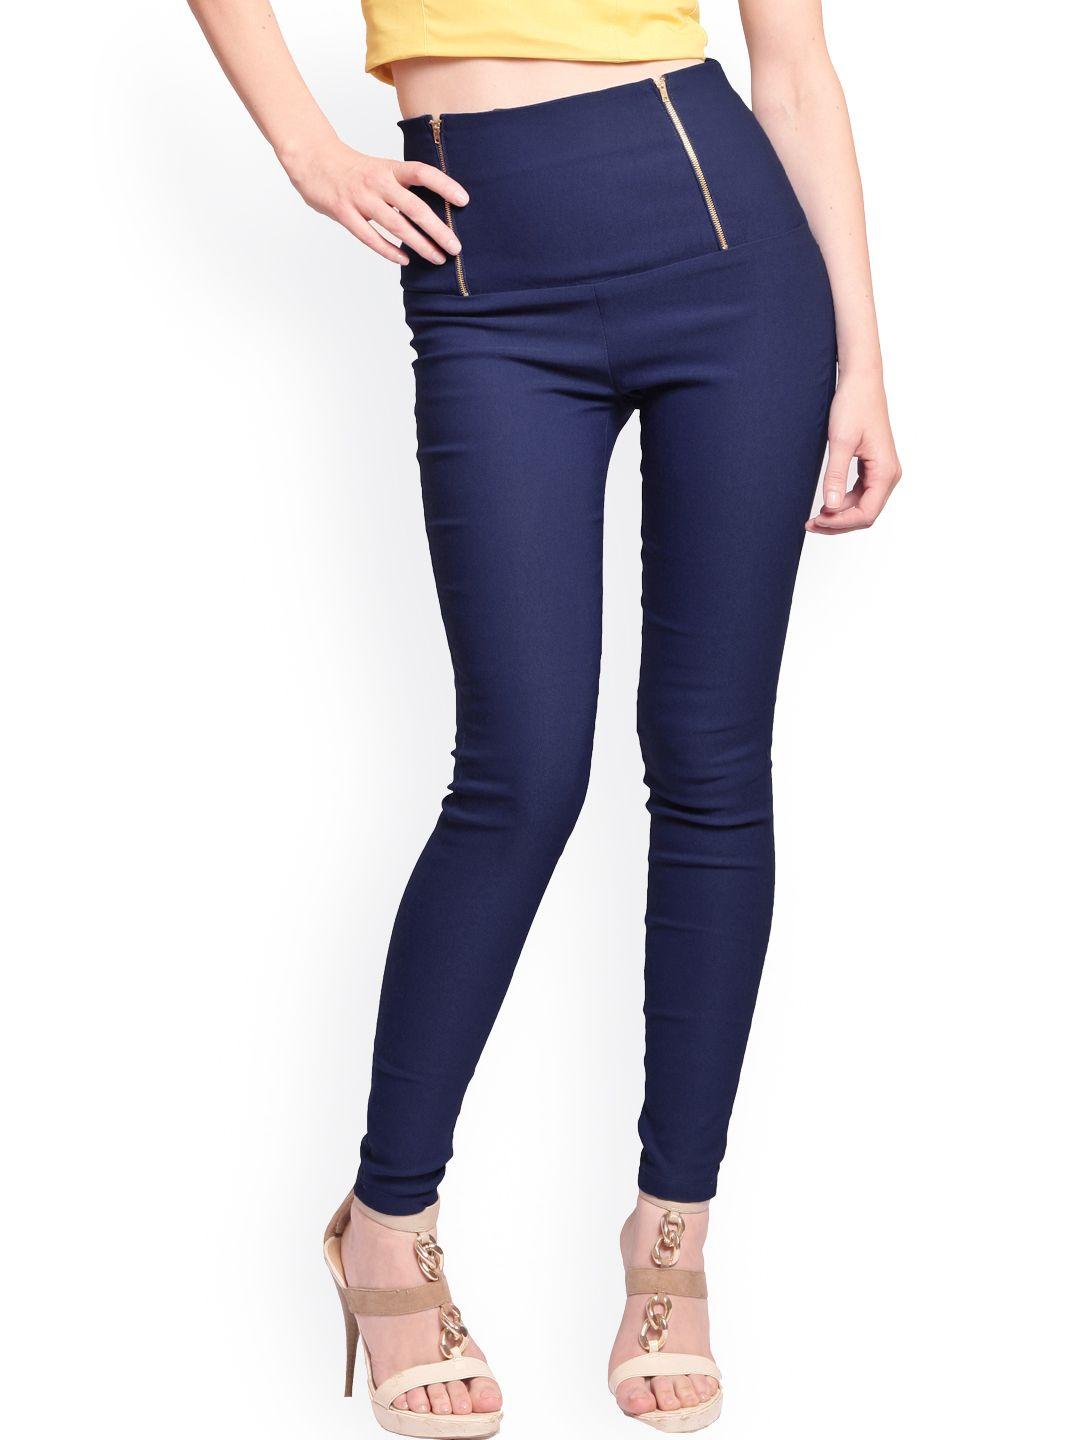 miss chase navy retro high waist slim fit jeggings